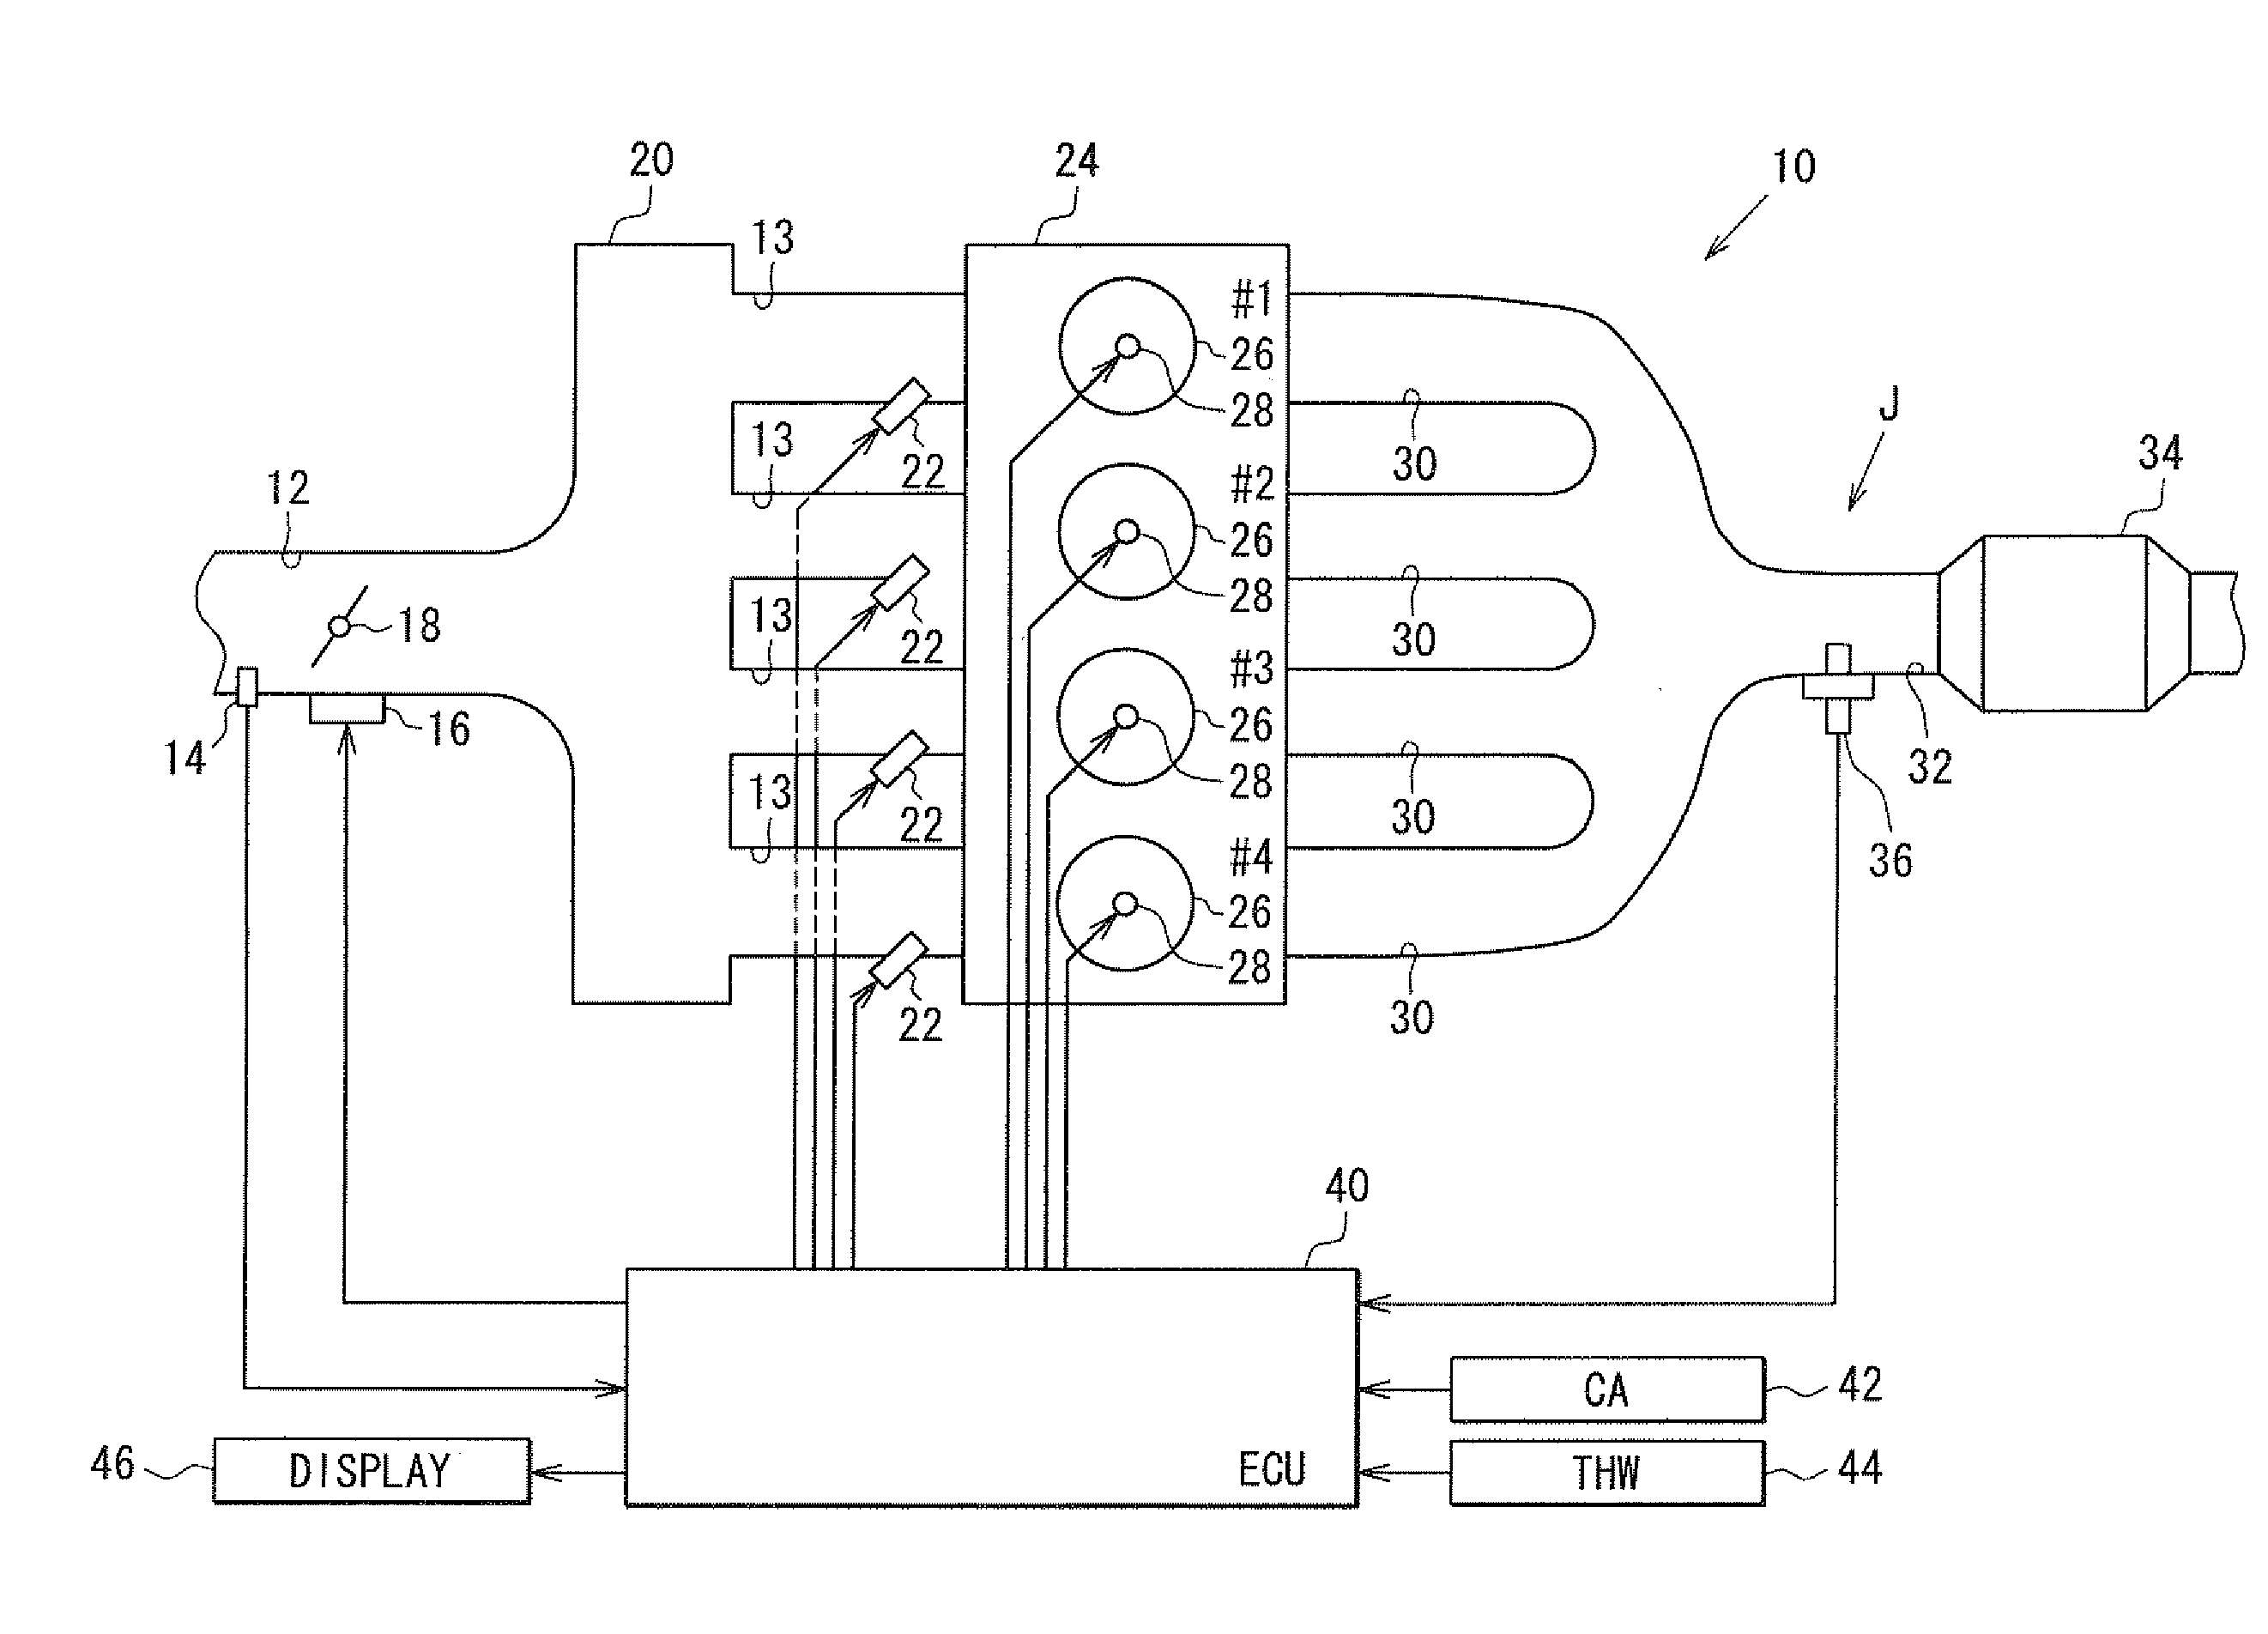 Abnormality diagnosis device and control system for internal combustion engine